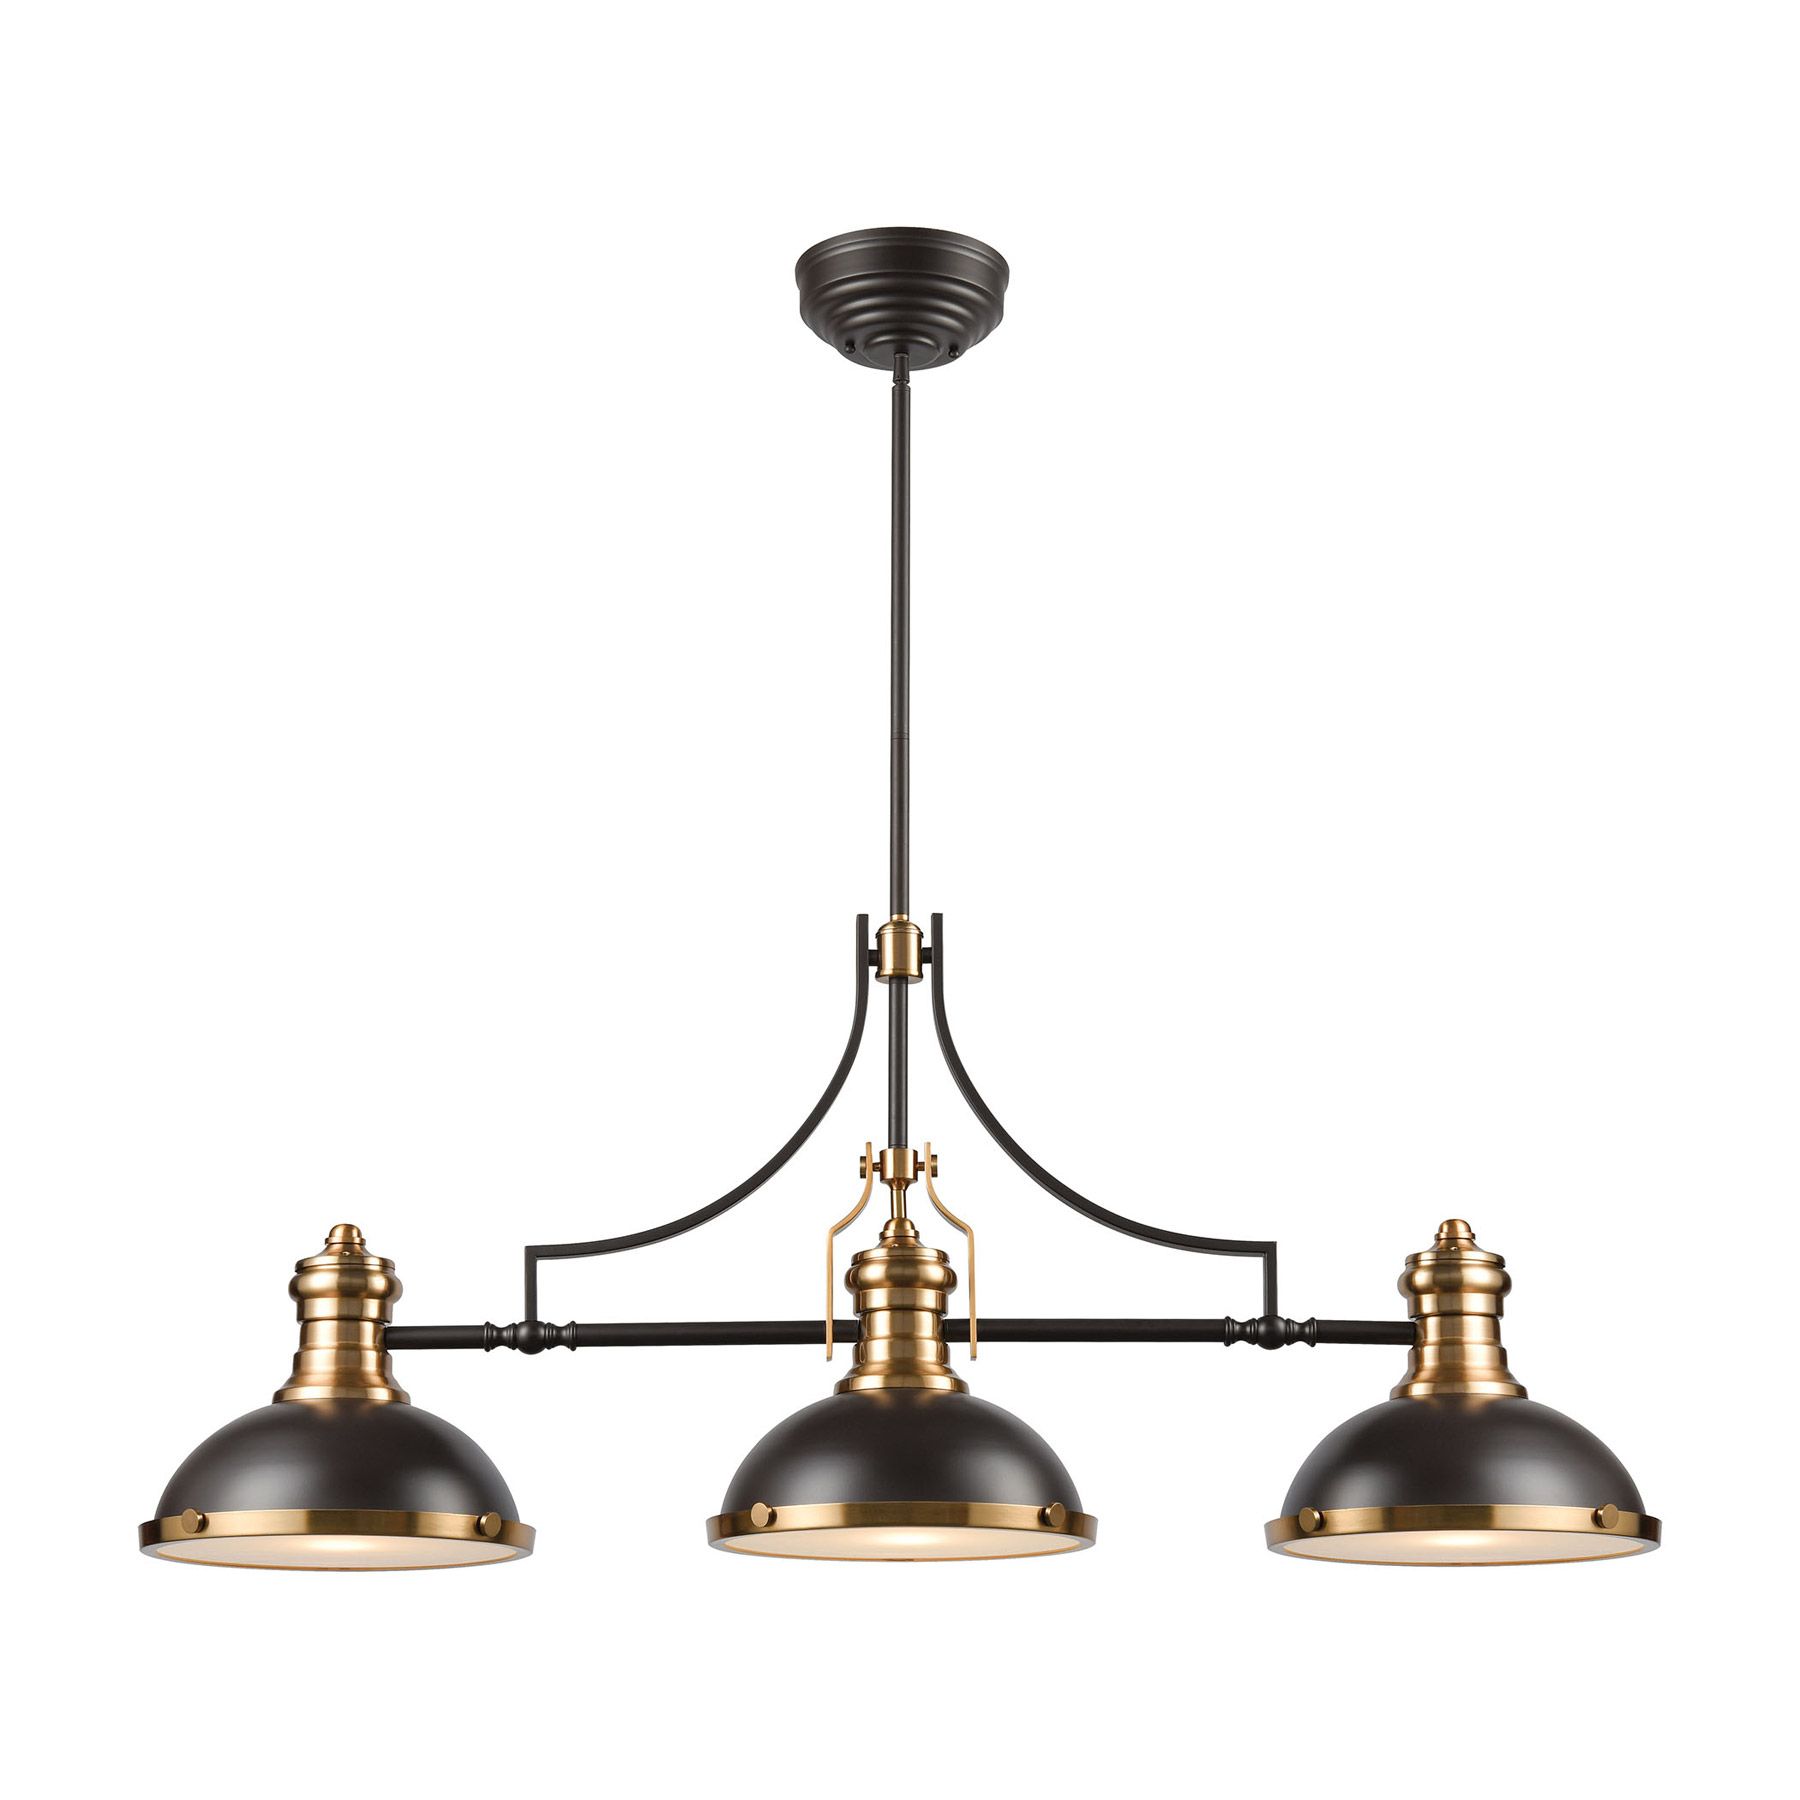 Elk Lighting 67217 3 3 Light Island Light In Oil Rubbed Intended For Textured Glass And Oil Rubbed Bronze Metal Pendant Lights (View 10 of 15)